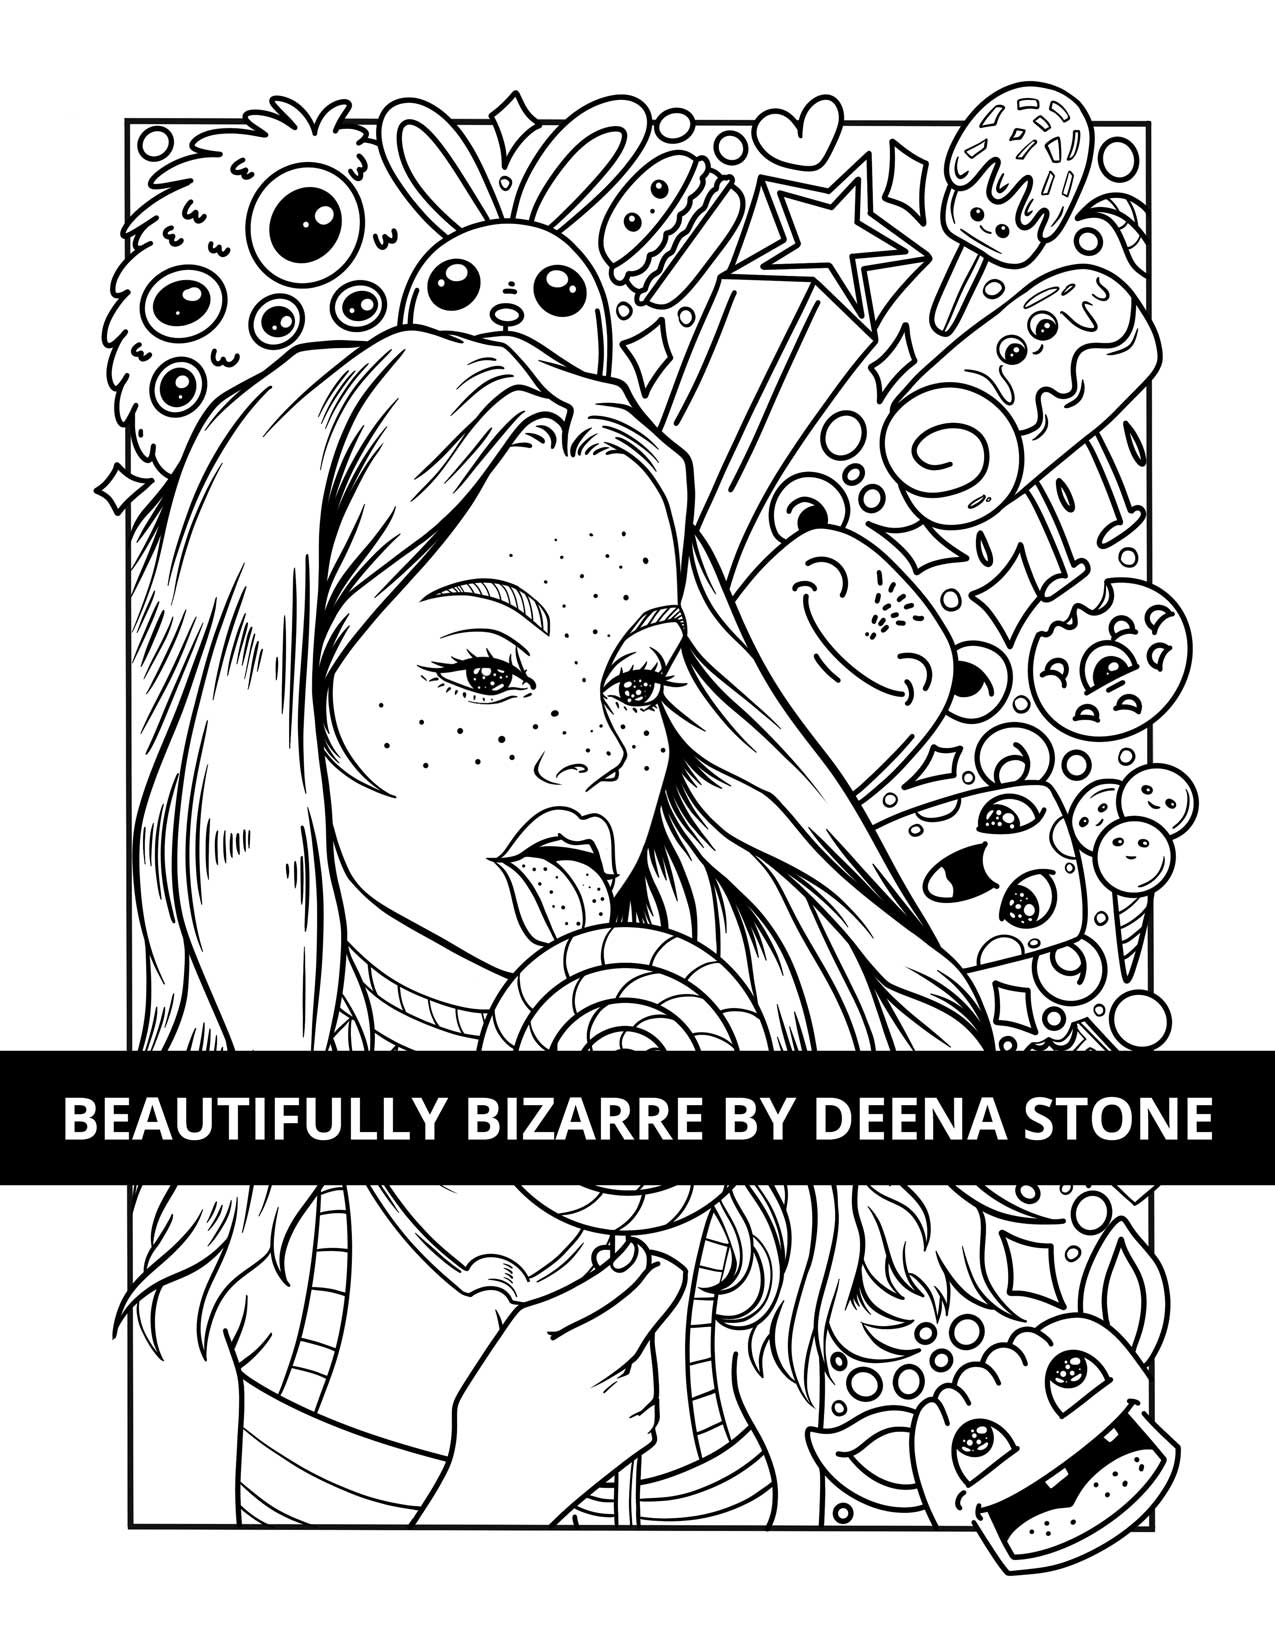 relax and accept the crazy coloring book